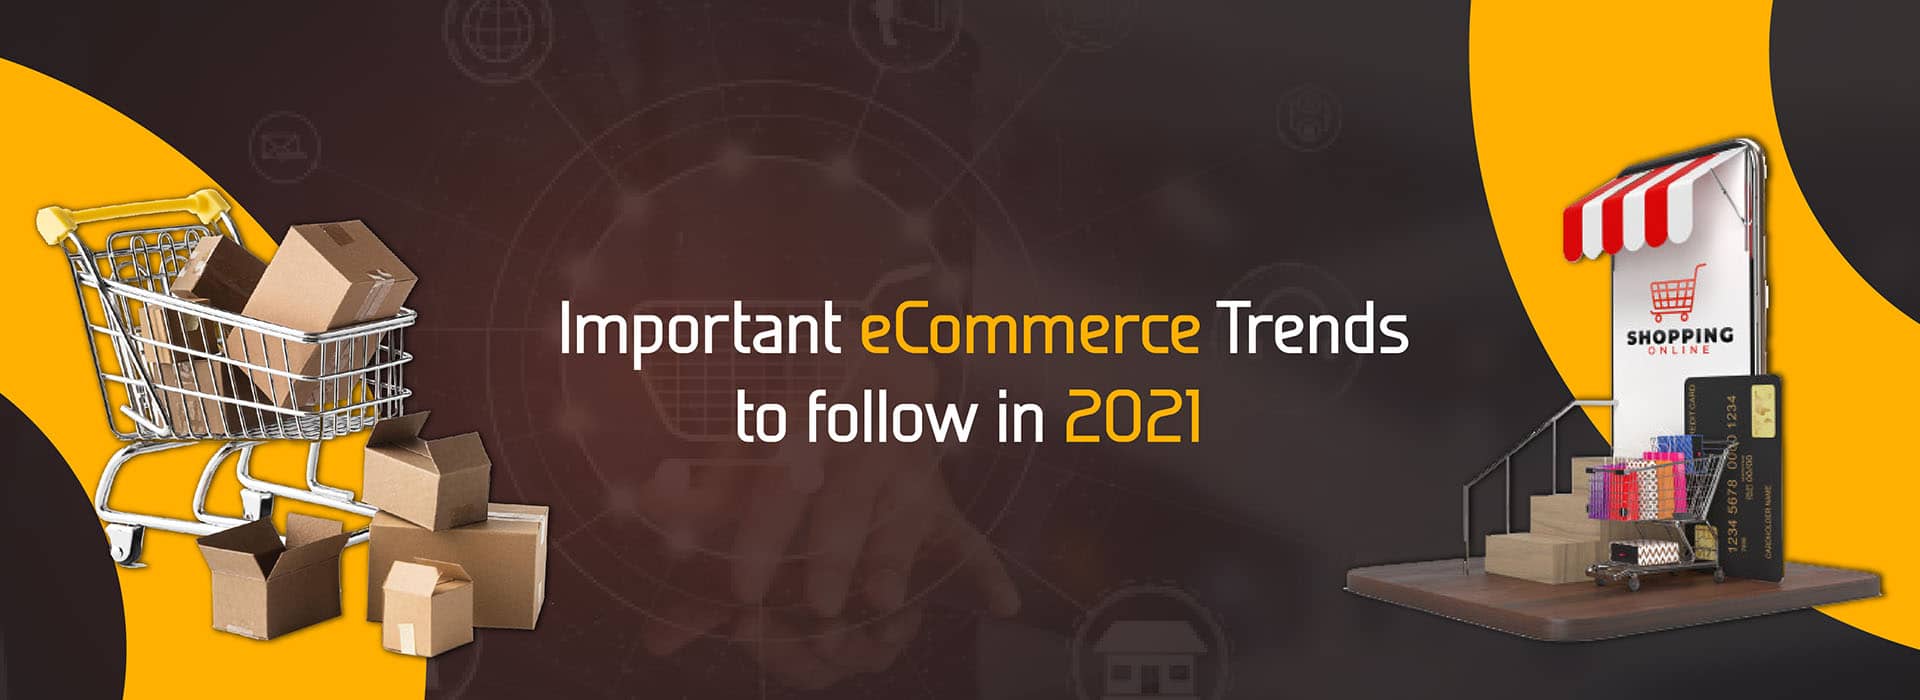 Important Ecommerce Trends to follow in 2021